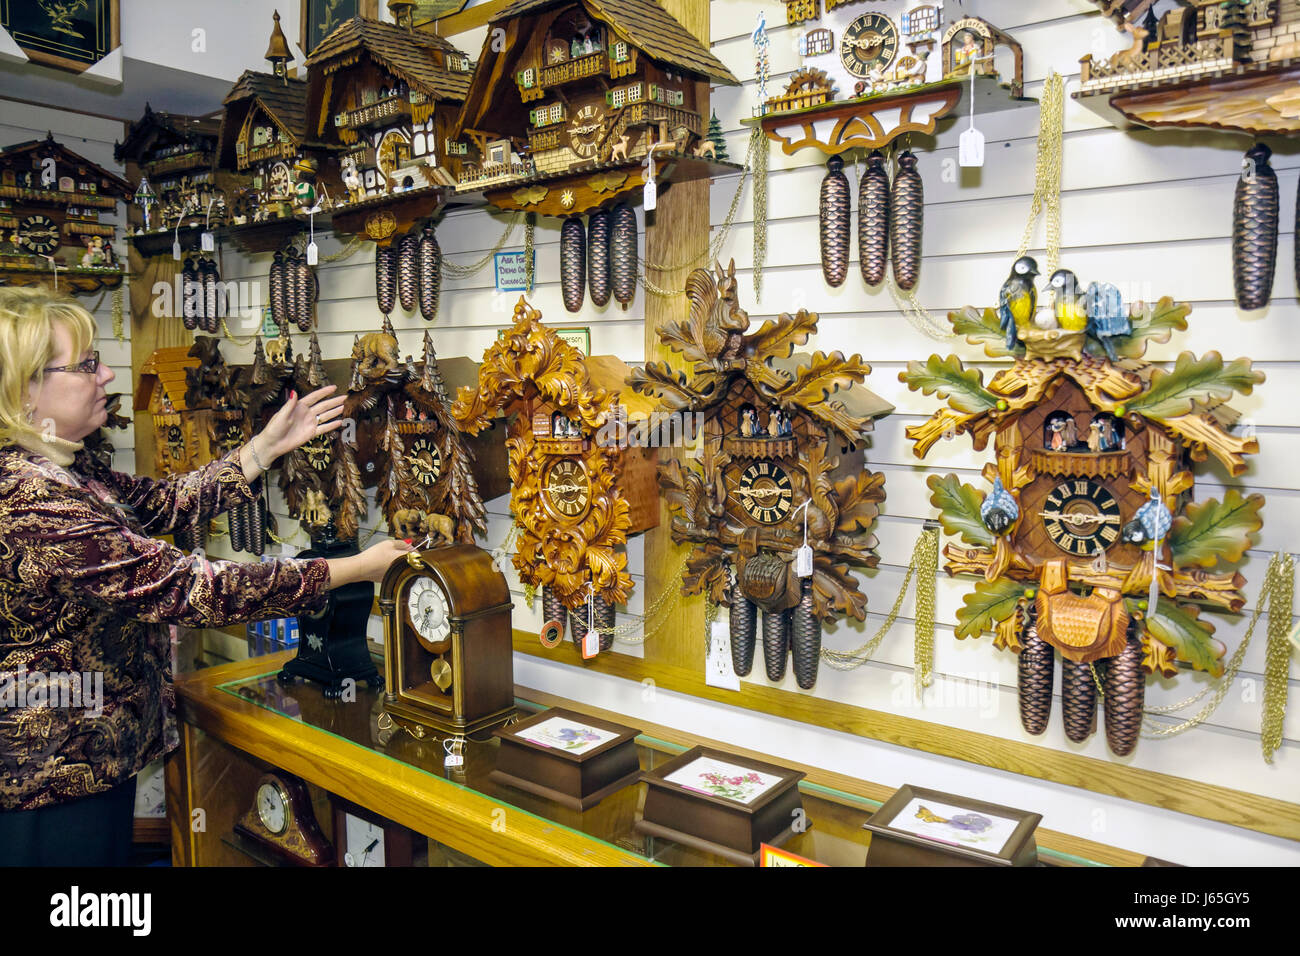 Michigan Frankenmuth,German Bavarian ethnic community,Frankenmuth Clock Company,display sale time,timepiece,Black Forest cuckoo clocks,carved wood,cra Stock Photo